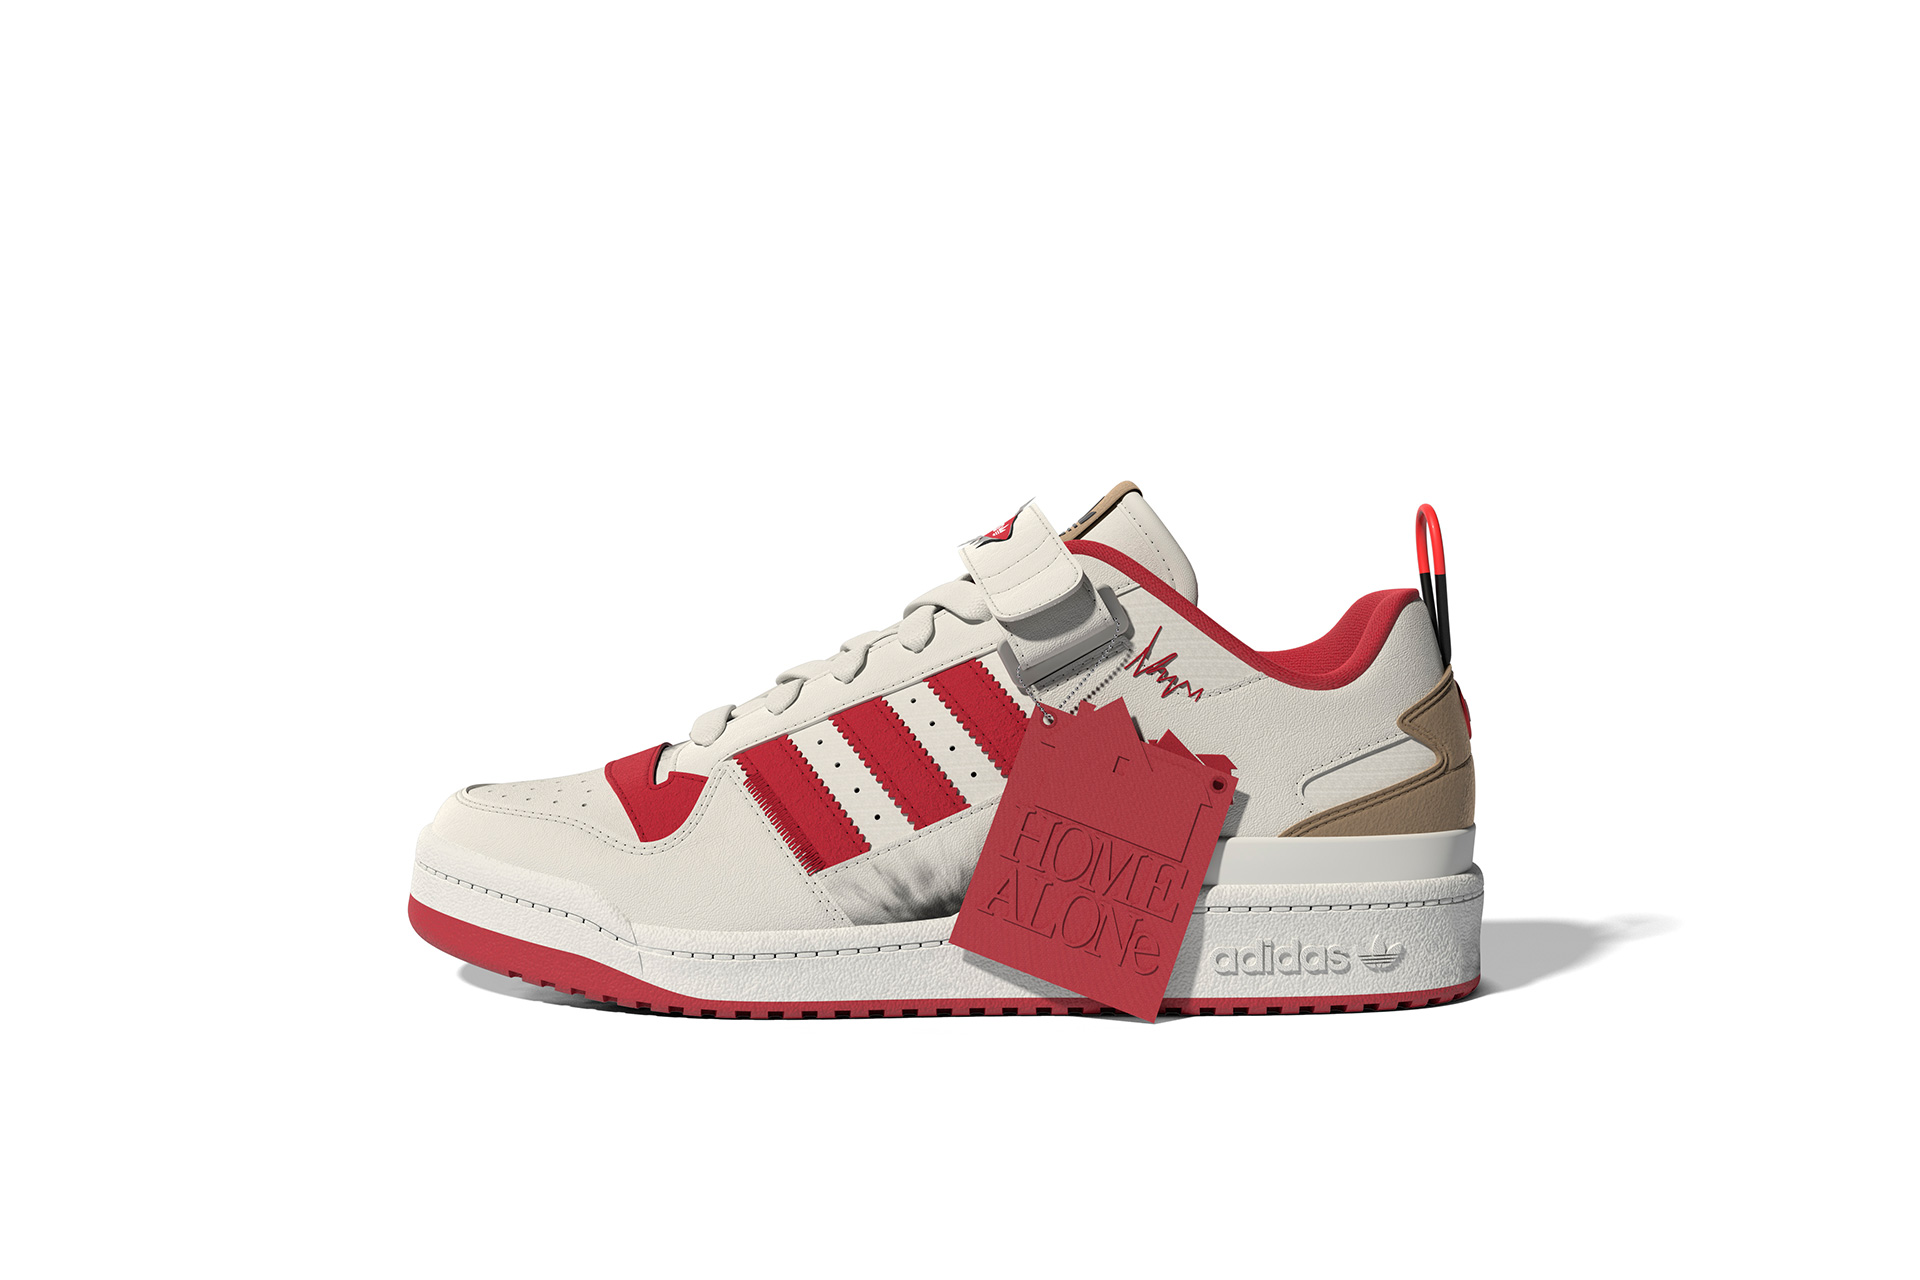 Sneakers Release – adidas x Forum Home Alone “Cream  White/Collegiate Red” Unisex Shoe Dropping 12/11